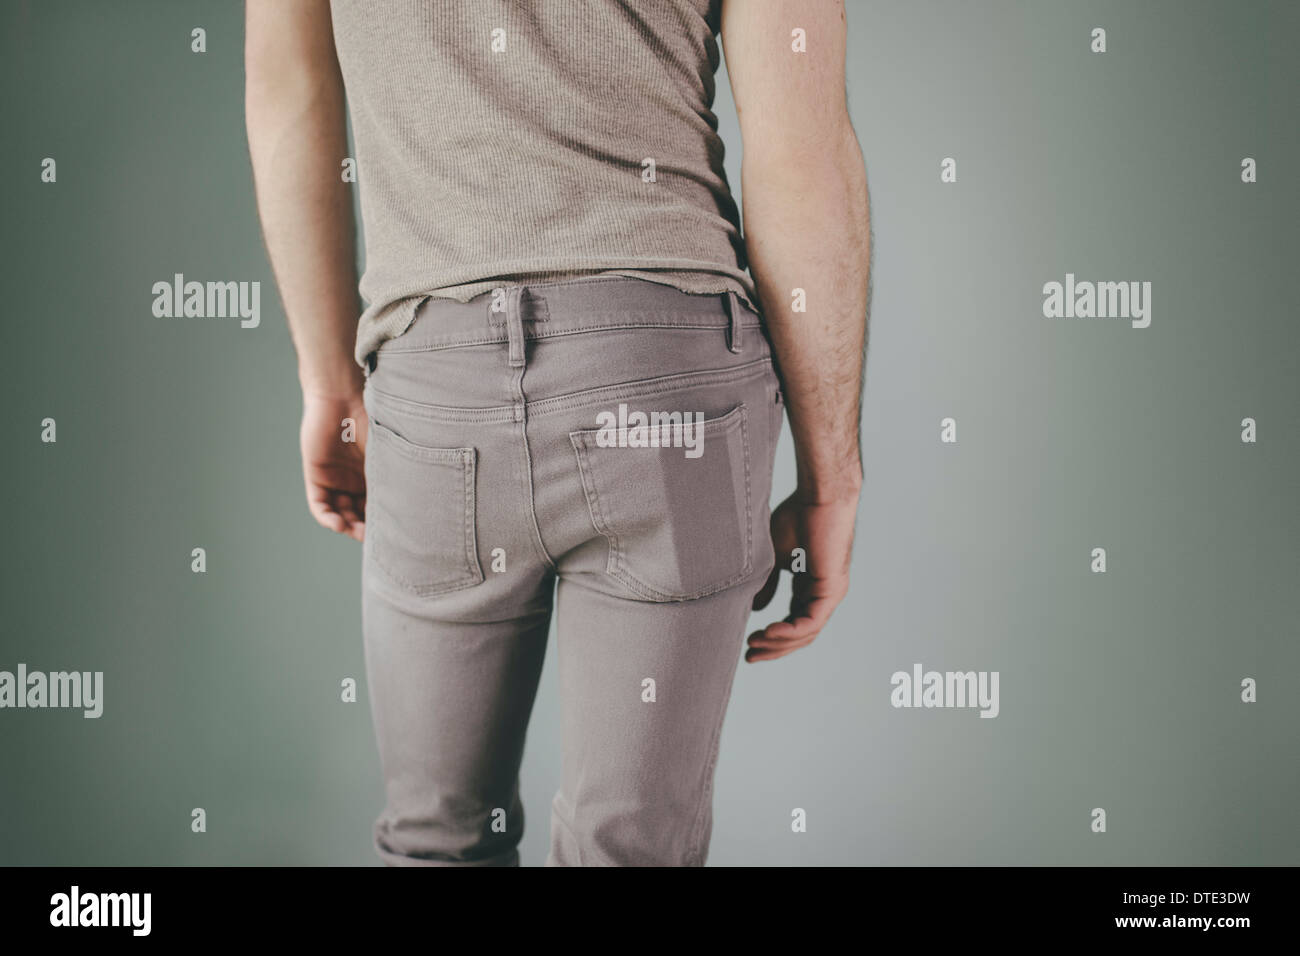 Part of series showing different ways one carries a smartphone, in the back pocket of tight jeans Stock Photo